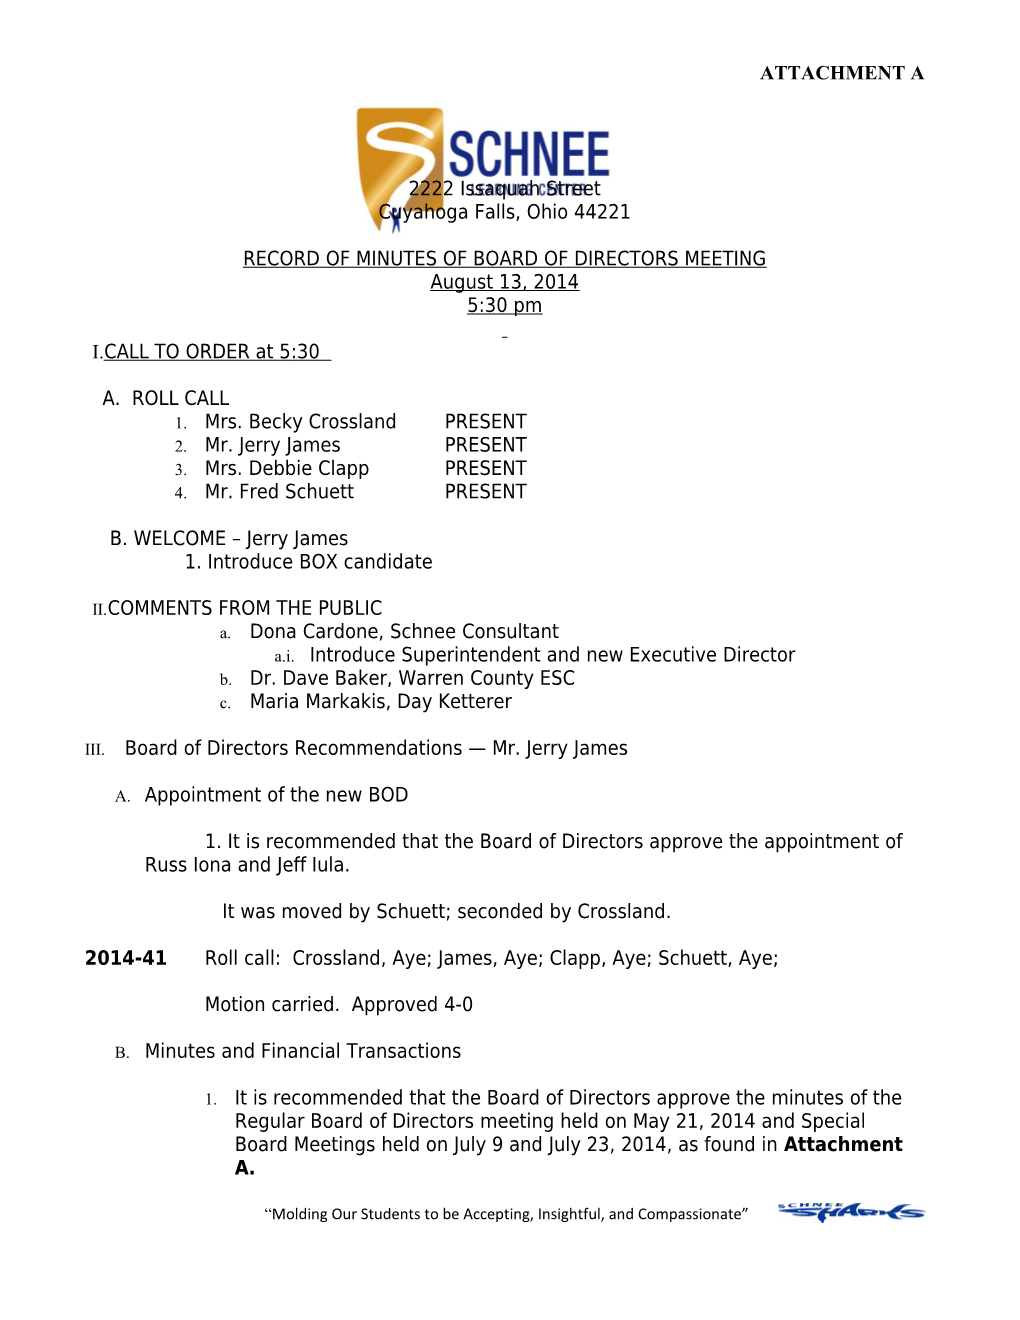 Record of Minutes of Board of Directors Meeting